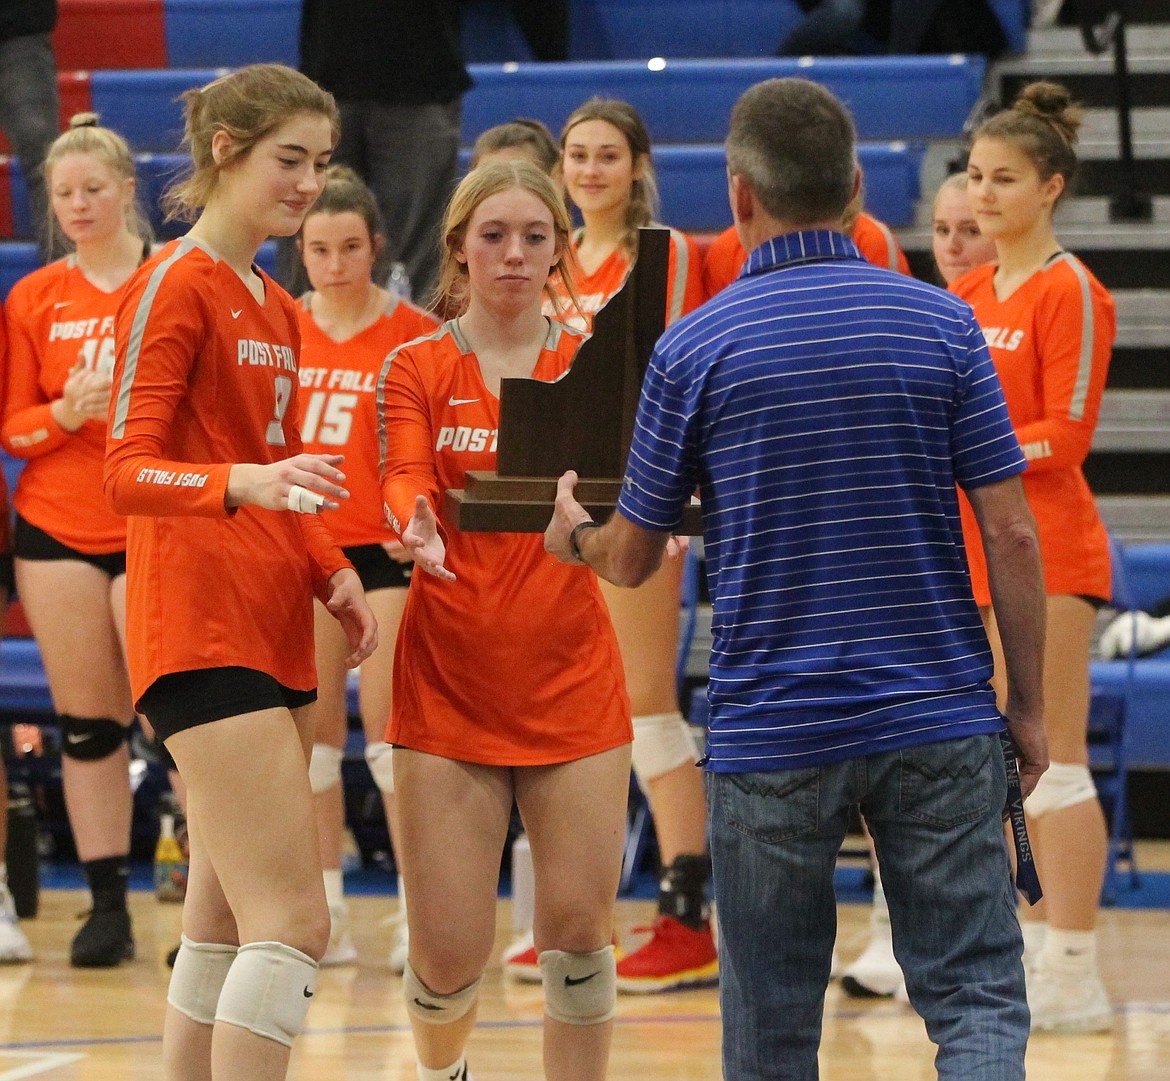 MARK NELKE/Press
Rylee Hartwig, left, and Kassie Gardiner of Post Falls accept the fourth-place trophy from tournament director and Coeur d'Alene High athletic director Bill White on Saturday after losing to Eagle at the state 5A volleyball tournament at Coeur d'Alene High.